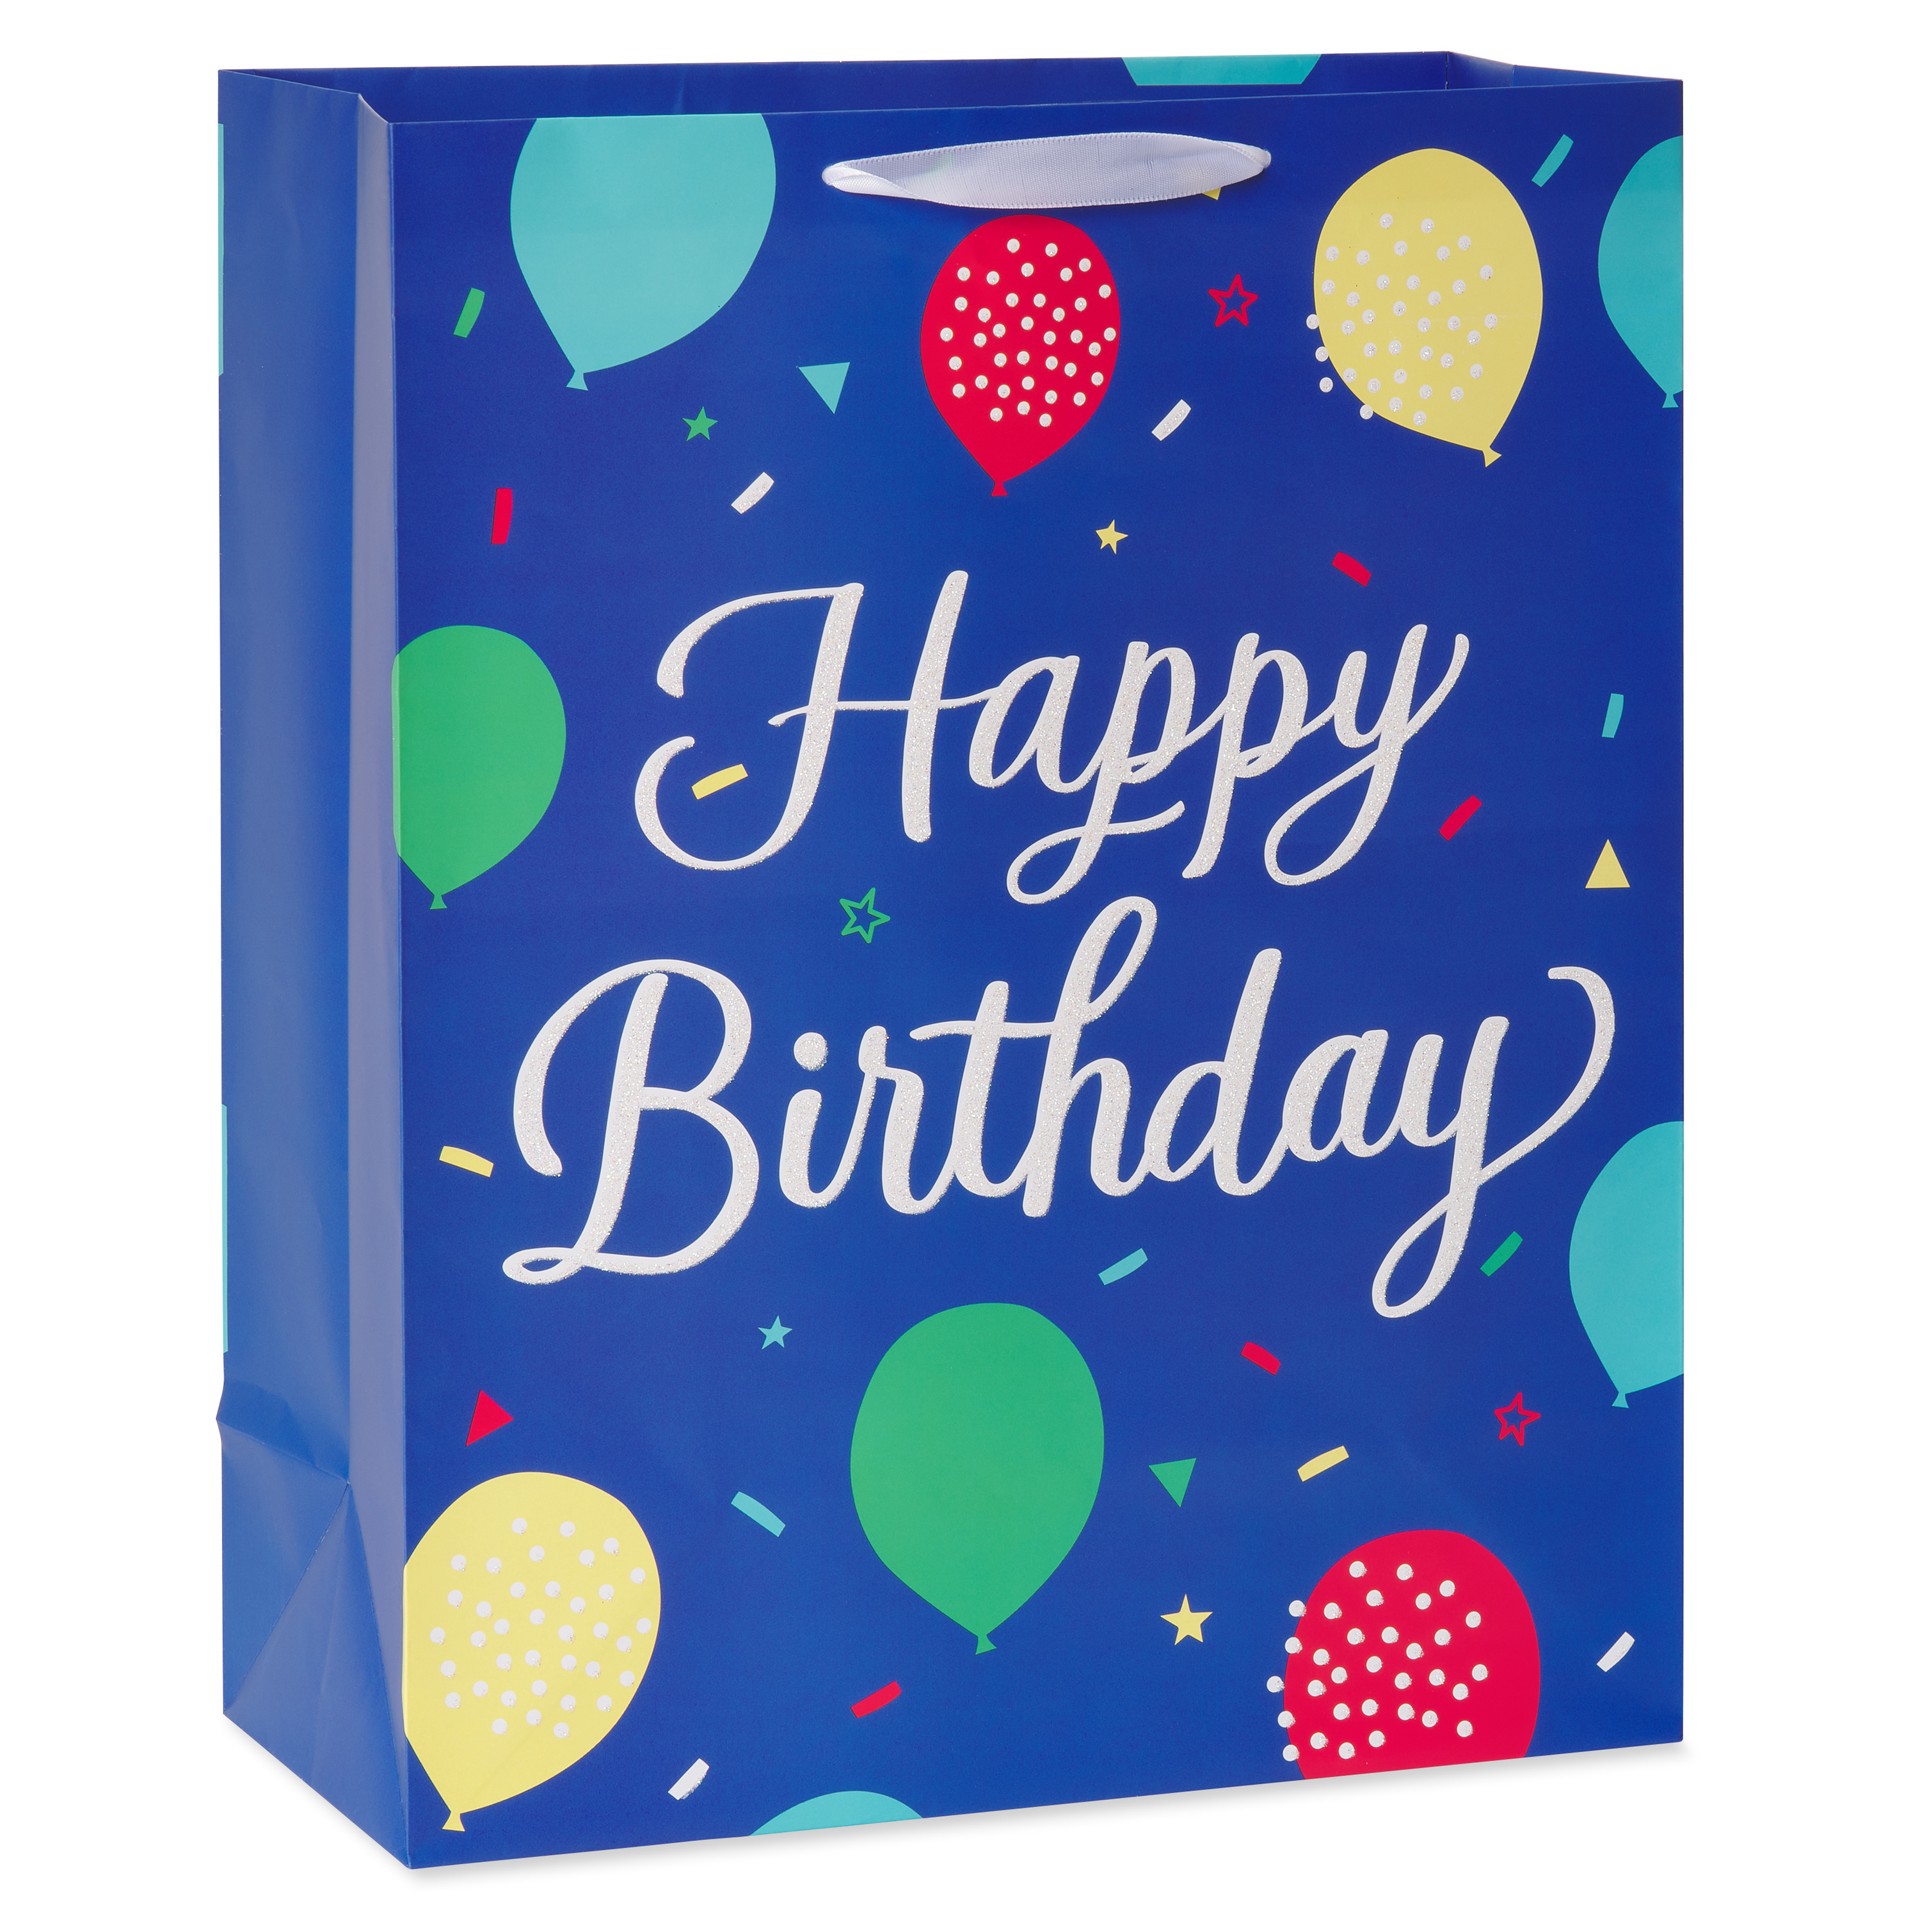 slide 1 of 9, American Greetings Give them extra smiles with an extra large gift bag. This design features “Happy Birthday” written in white script against a blue background with colorful balloons. Accents of crystalline add some sparkle and shine. This gift bag is the ideal size for giving large toys, clothing, blankets, electronics, or any oversized gift. Simply add some tissue paper (sold separately) to finish the look, and you're ready to make someone's day so much brighter., 1 ct